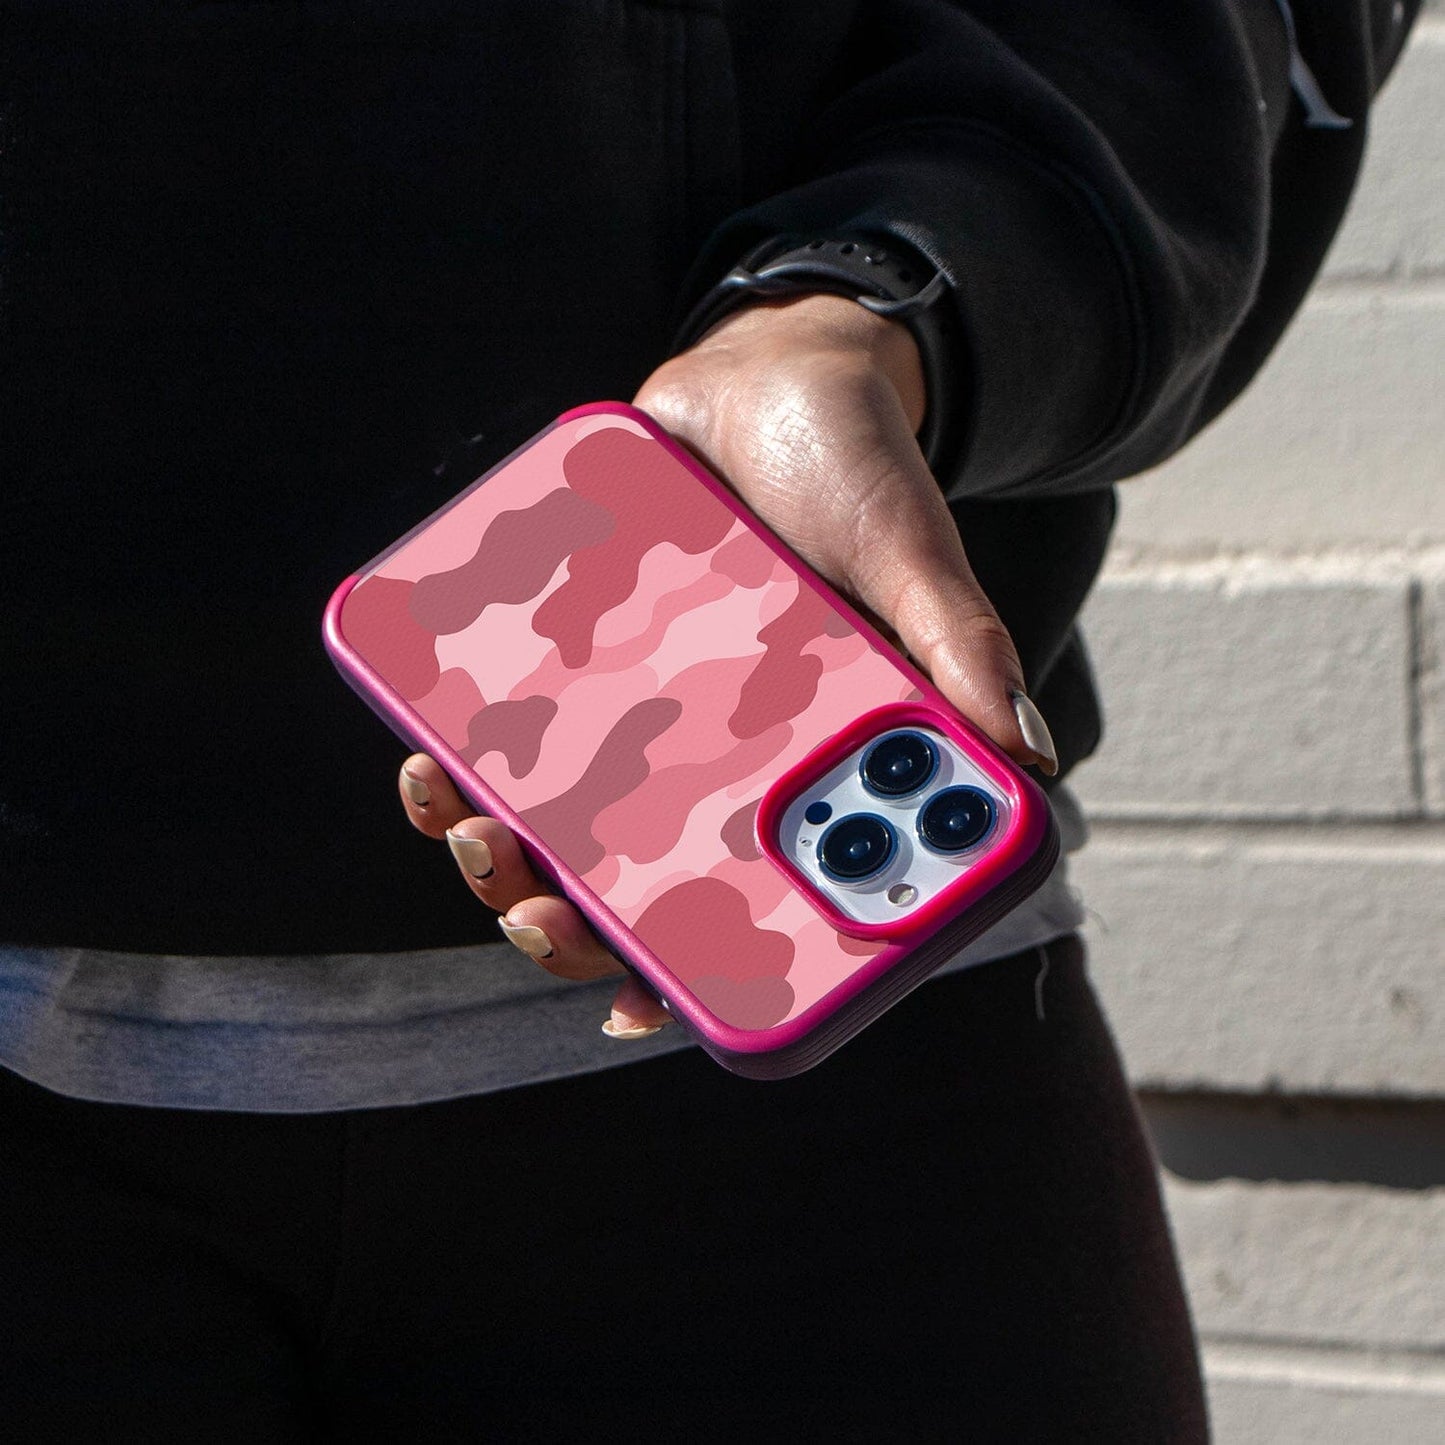 iPhone 14 Pro Pink Camo Design Case - Fremont Grip Lifestyle Shot (Girl in Black Holding Her Phone)